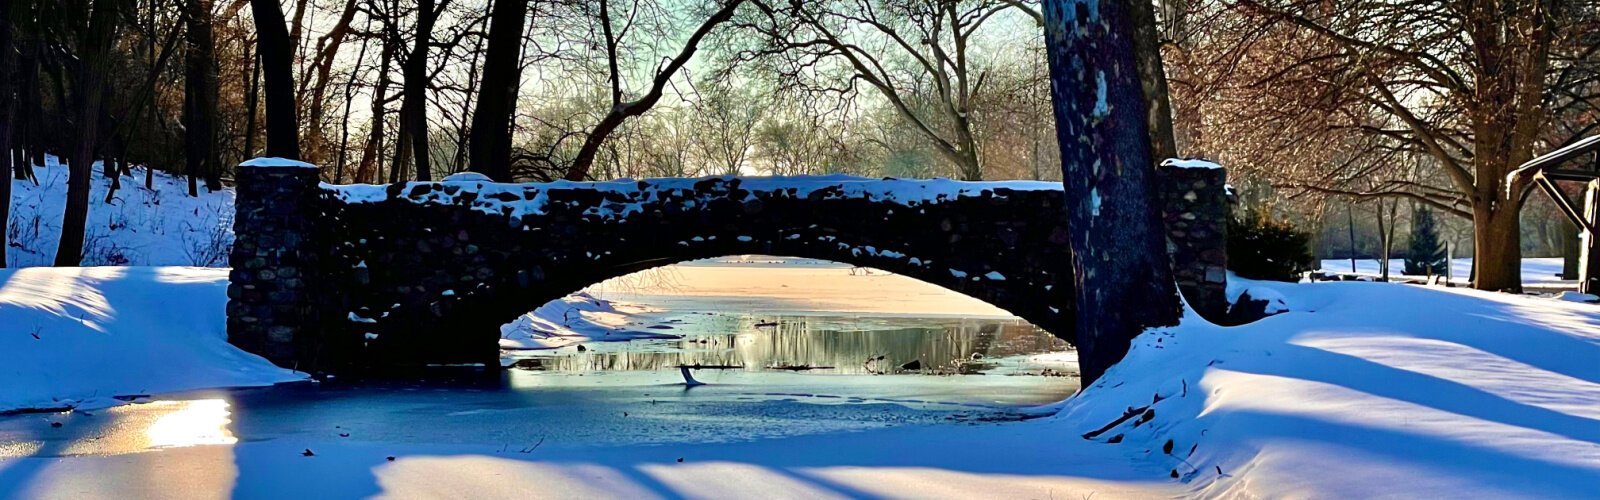 Sun shining on a snow-covered bridge at Snyder Park gave glimpses of warmer weather soon to come.